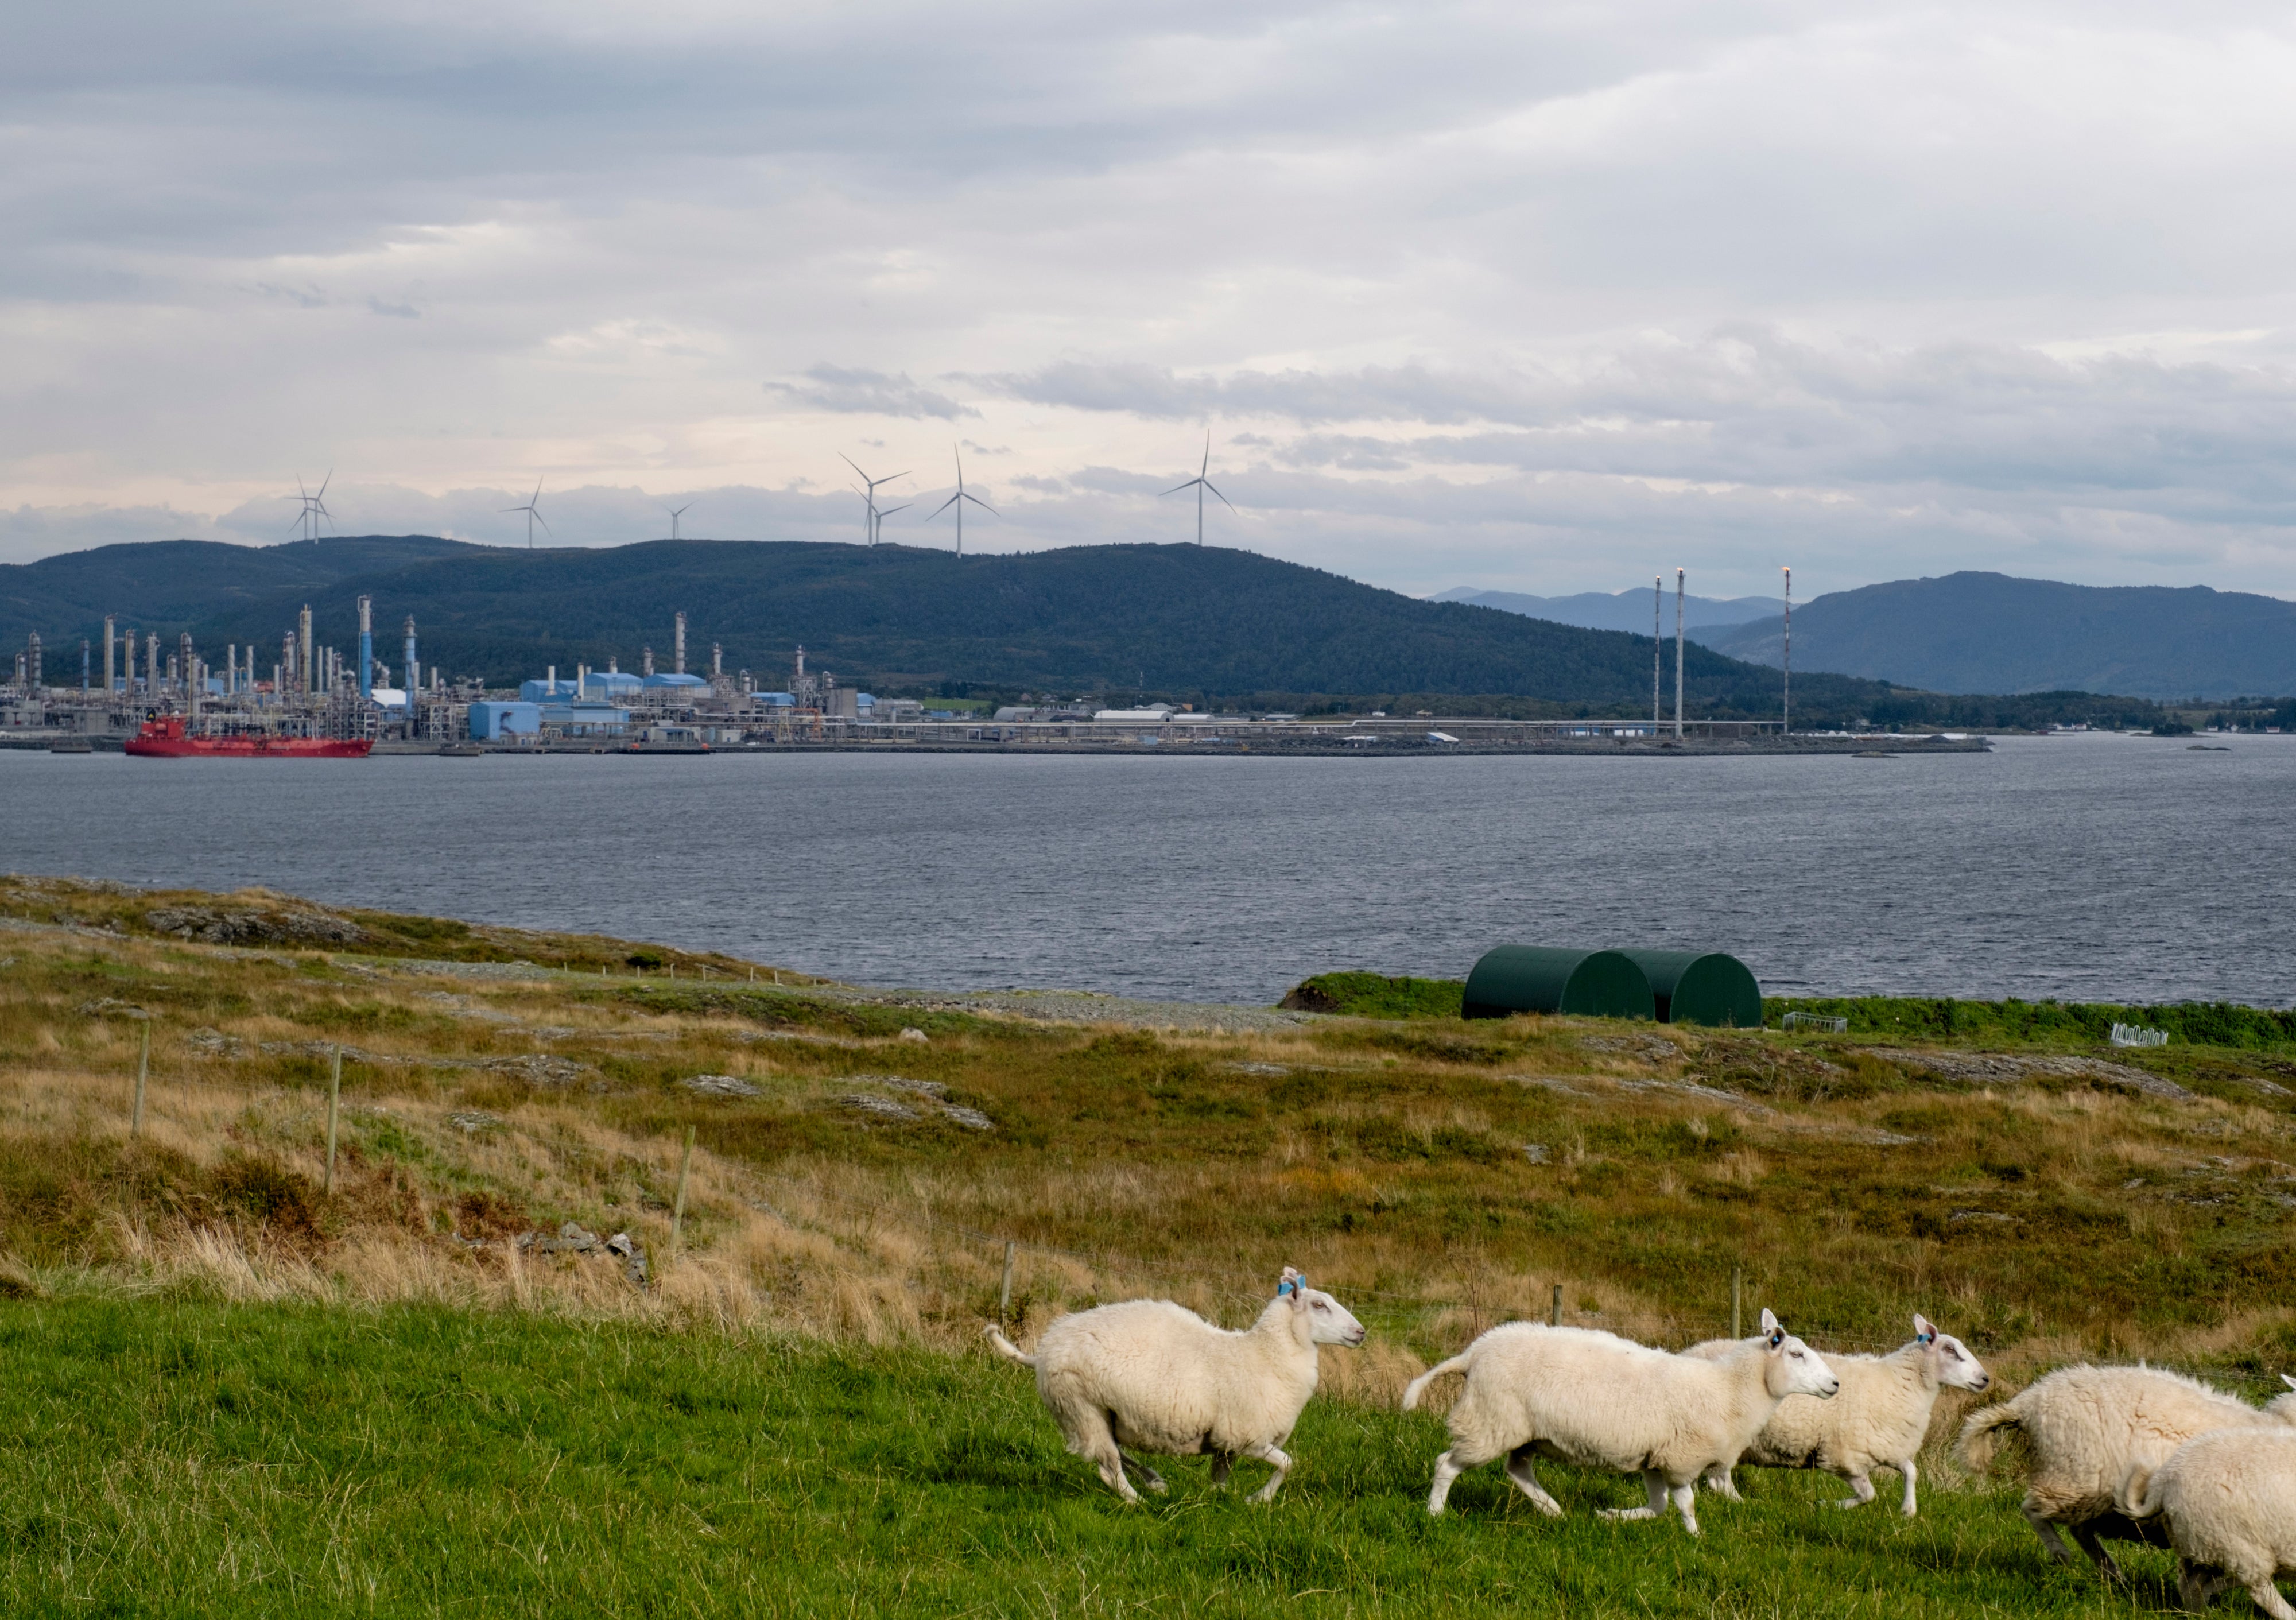 Sheep run along the coast in view of the Gassco gas processing plant near Stavanger